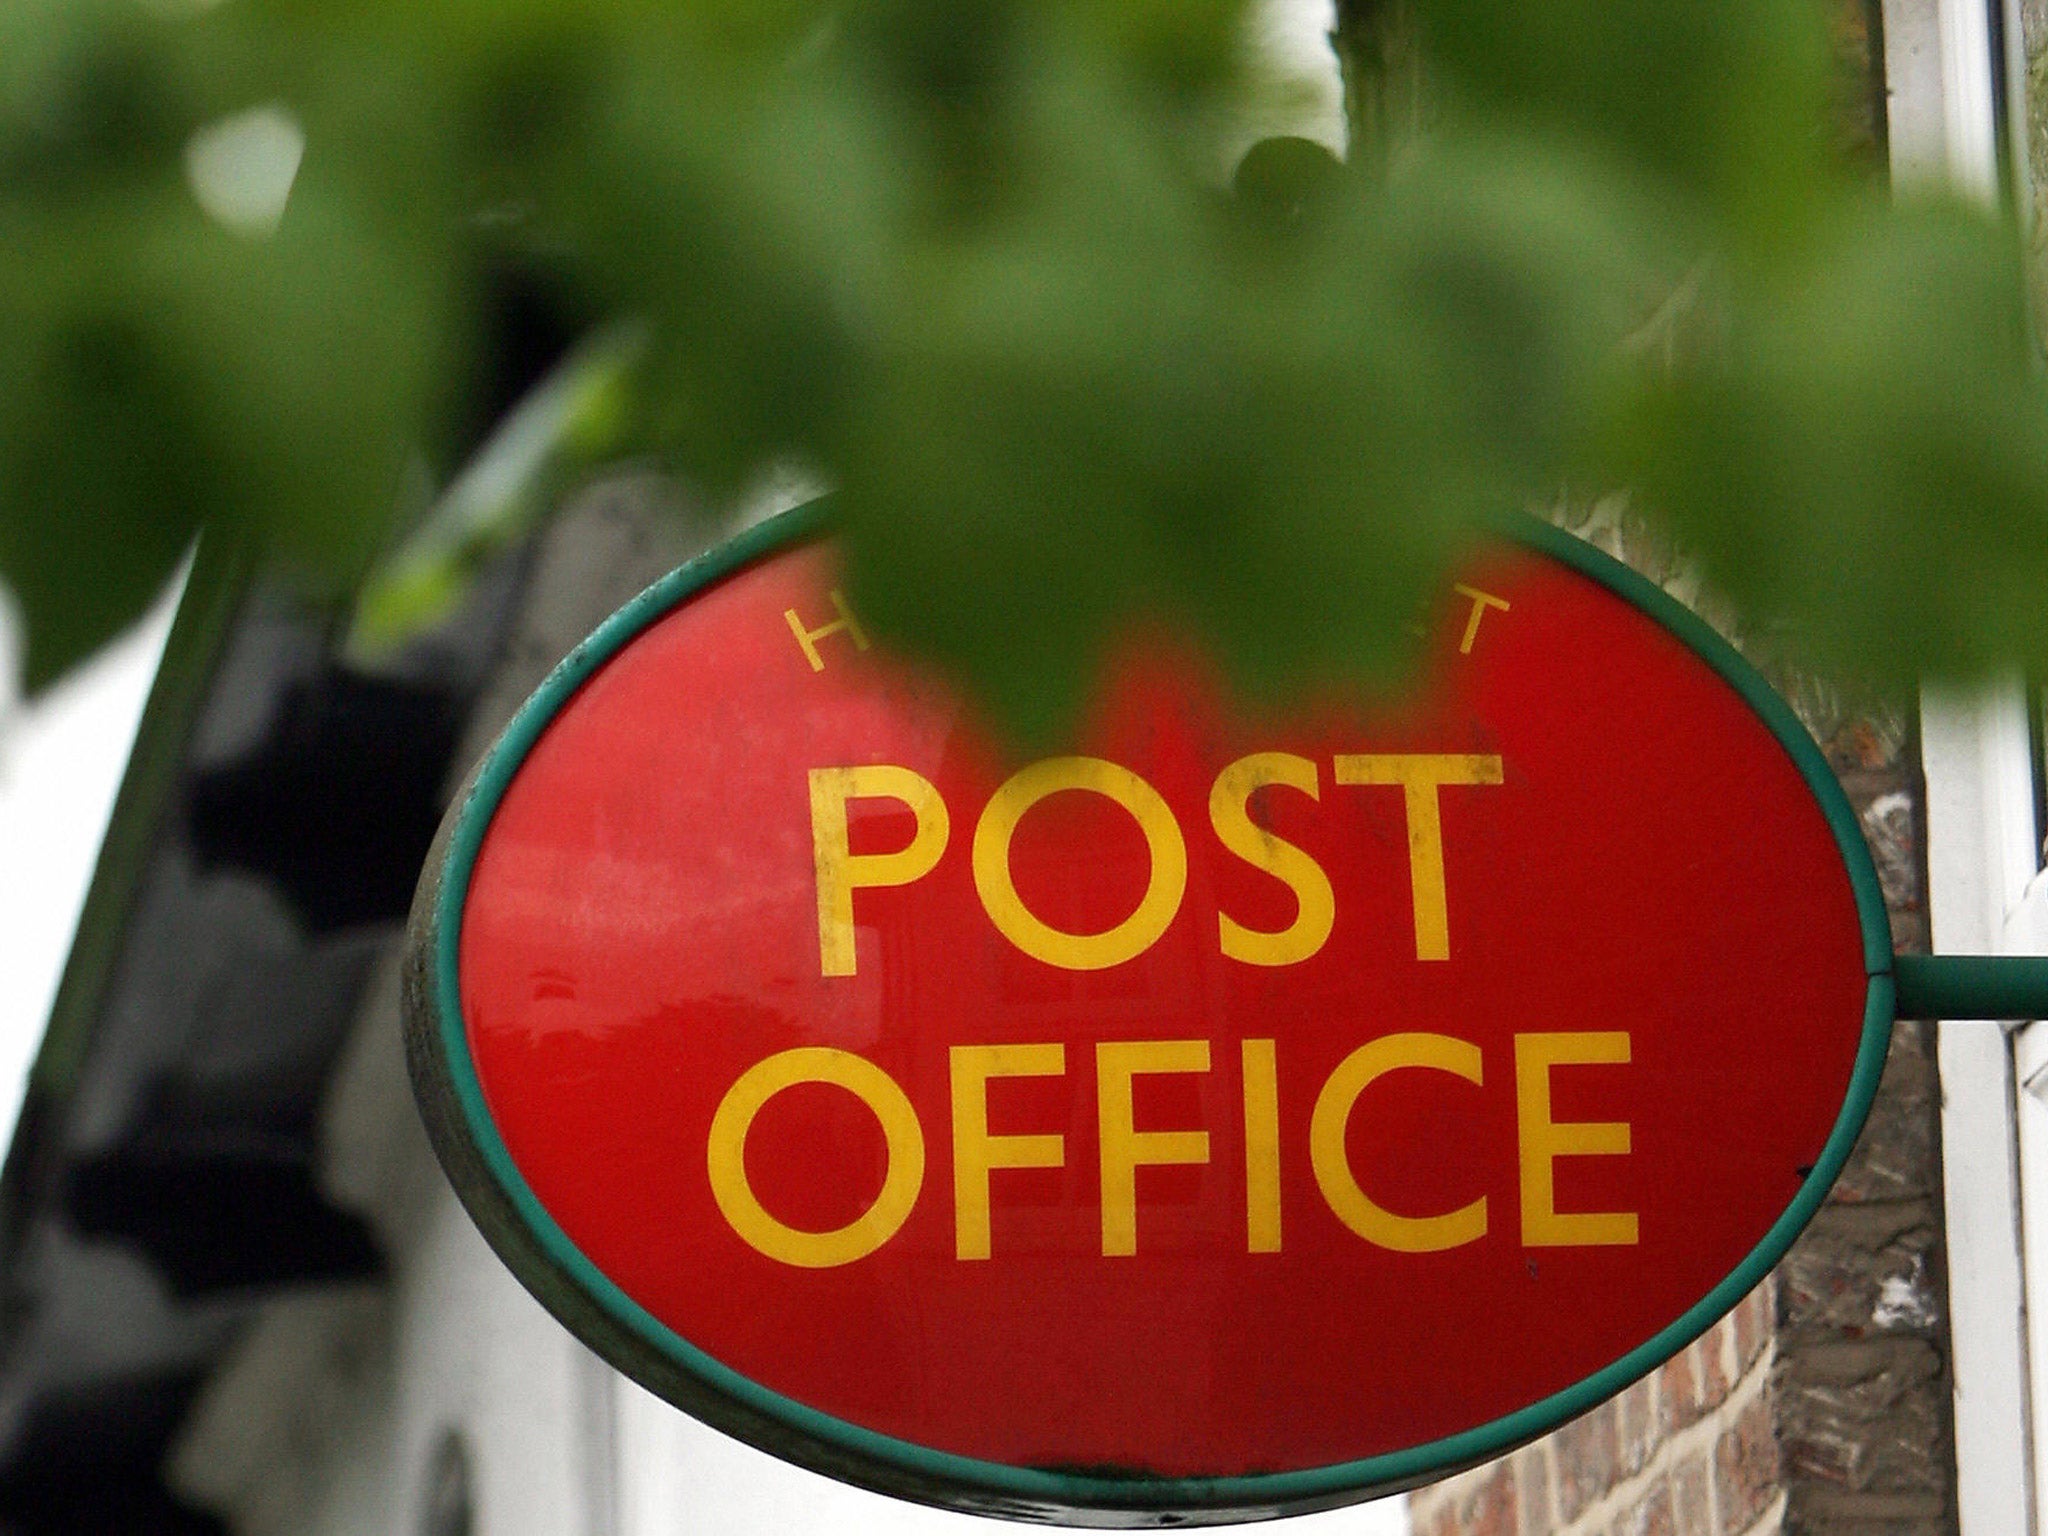 Workers in the country's biggest Post Office will stage a fresh strike tomorrow